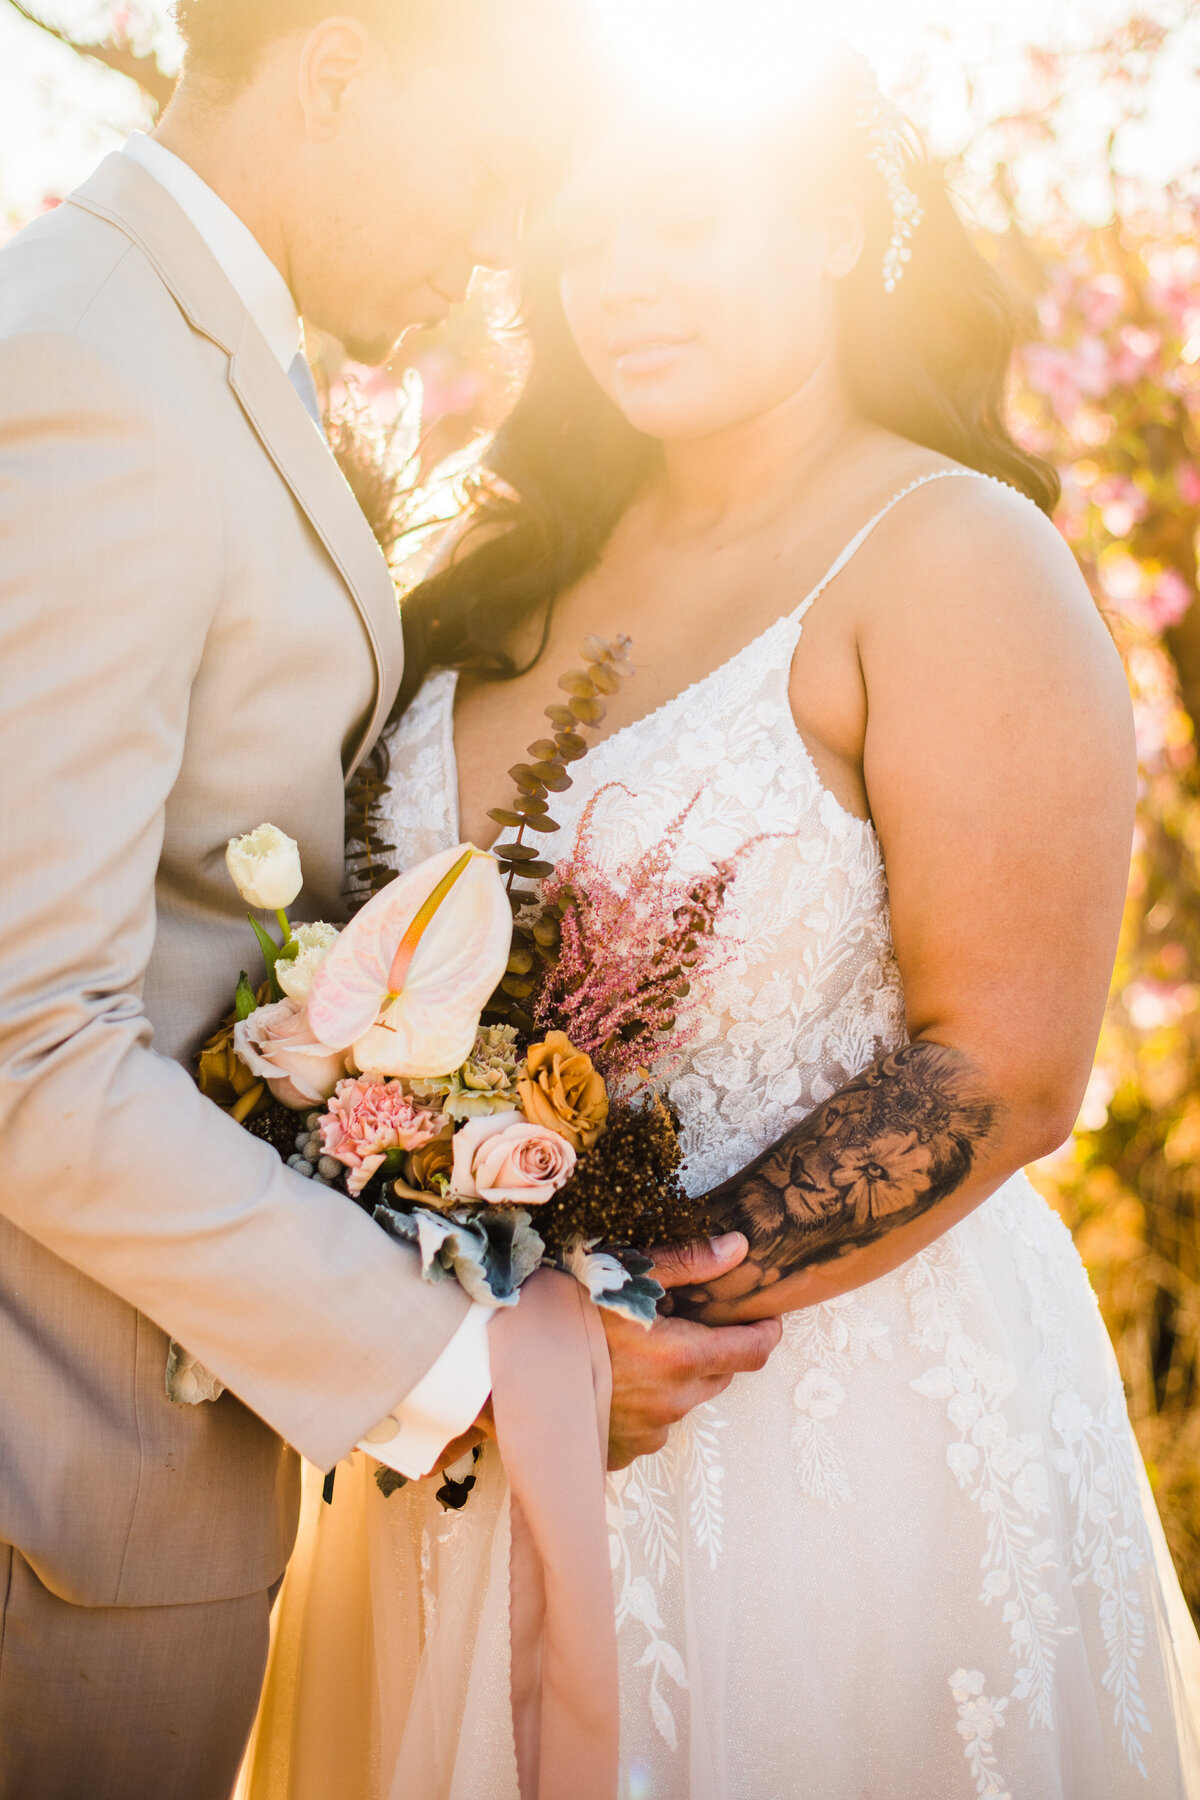 Bride and Groom holding each other close up sun flare bouquet wedding Schnepf Farms Meadows cherry blossoms